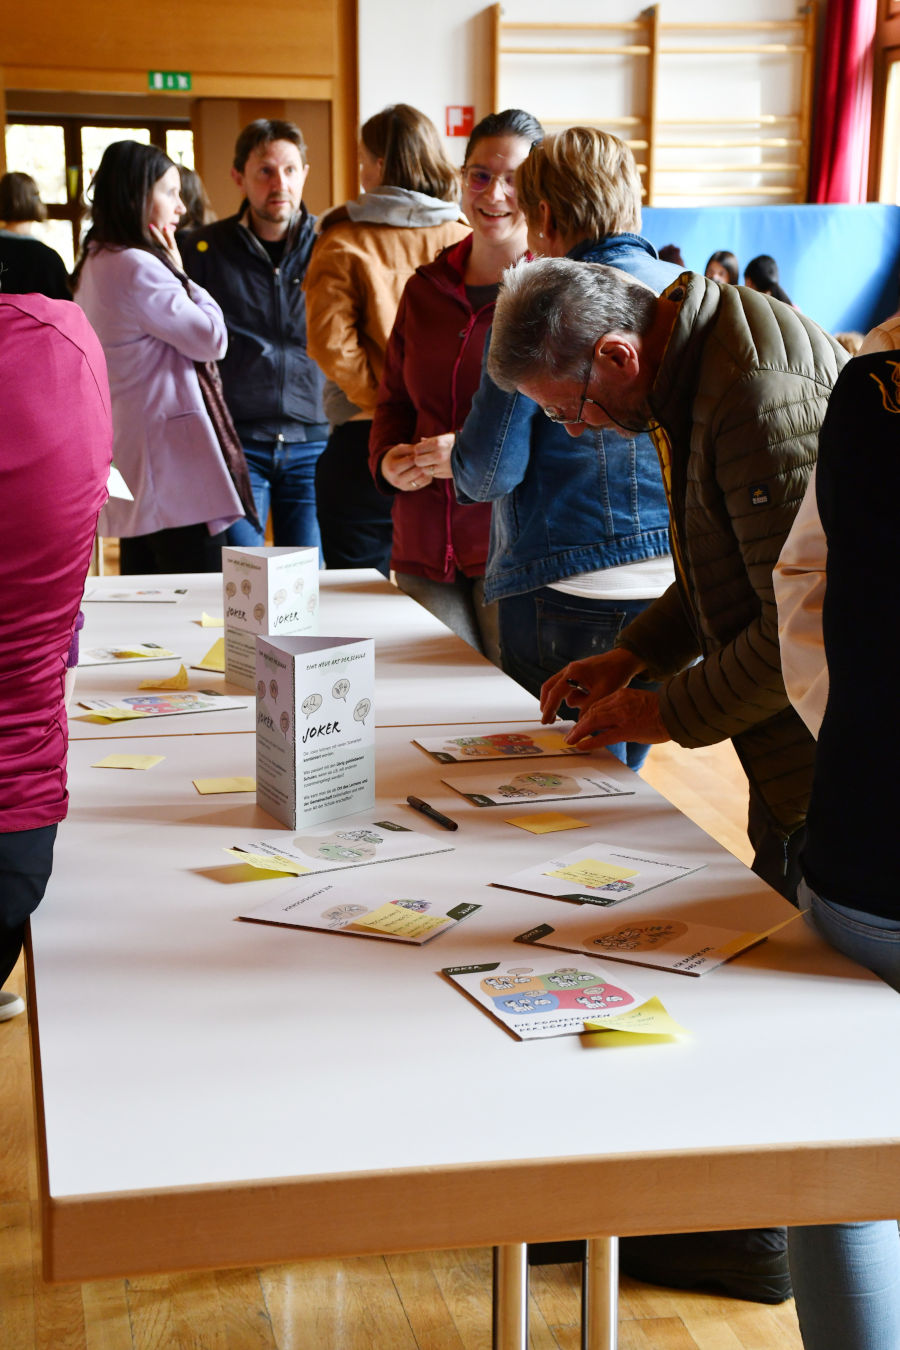 A picture that shows adults that read flyers and hand-outs that are spread on a long table.